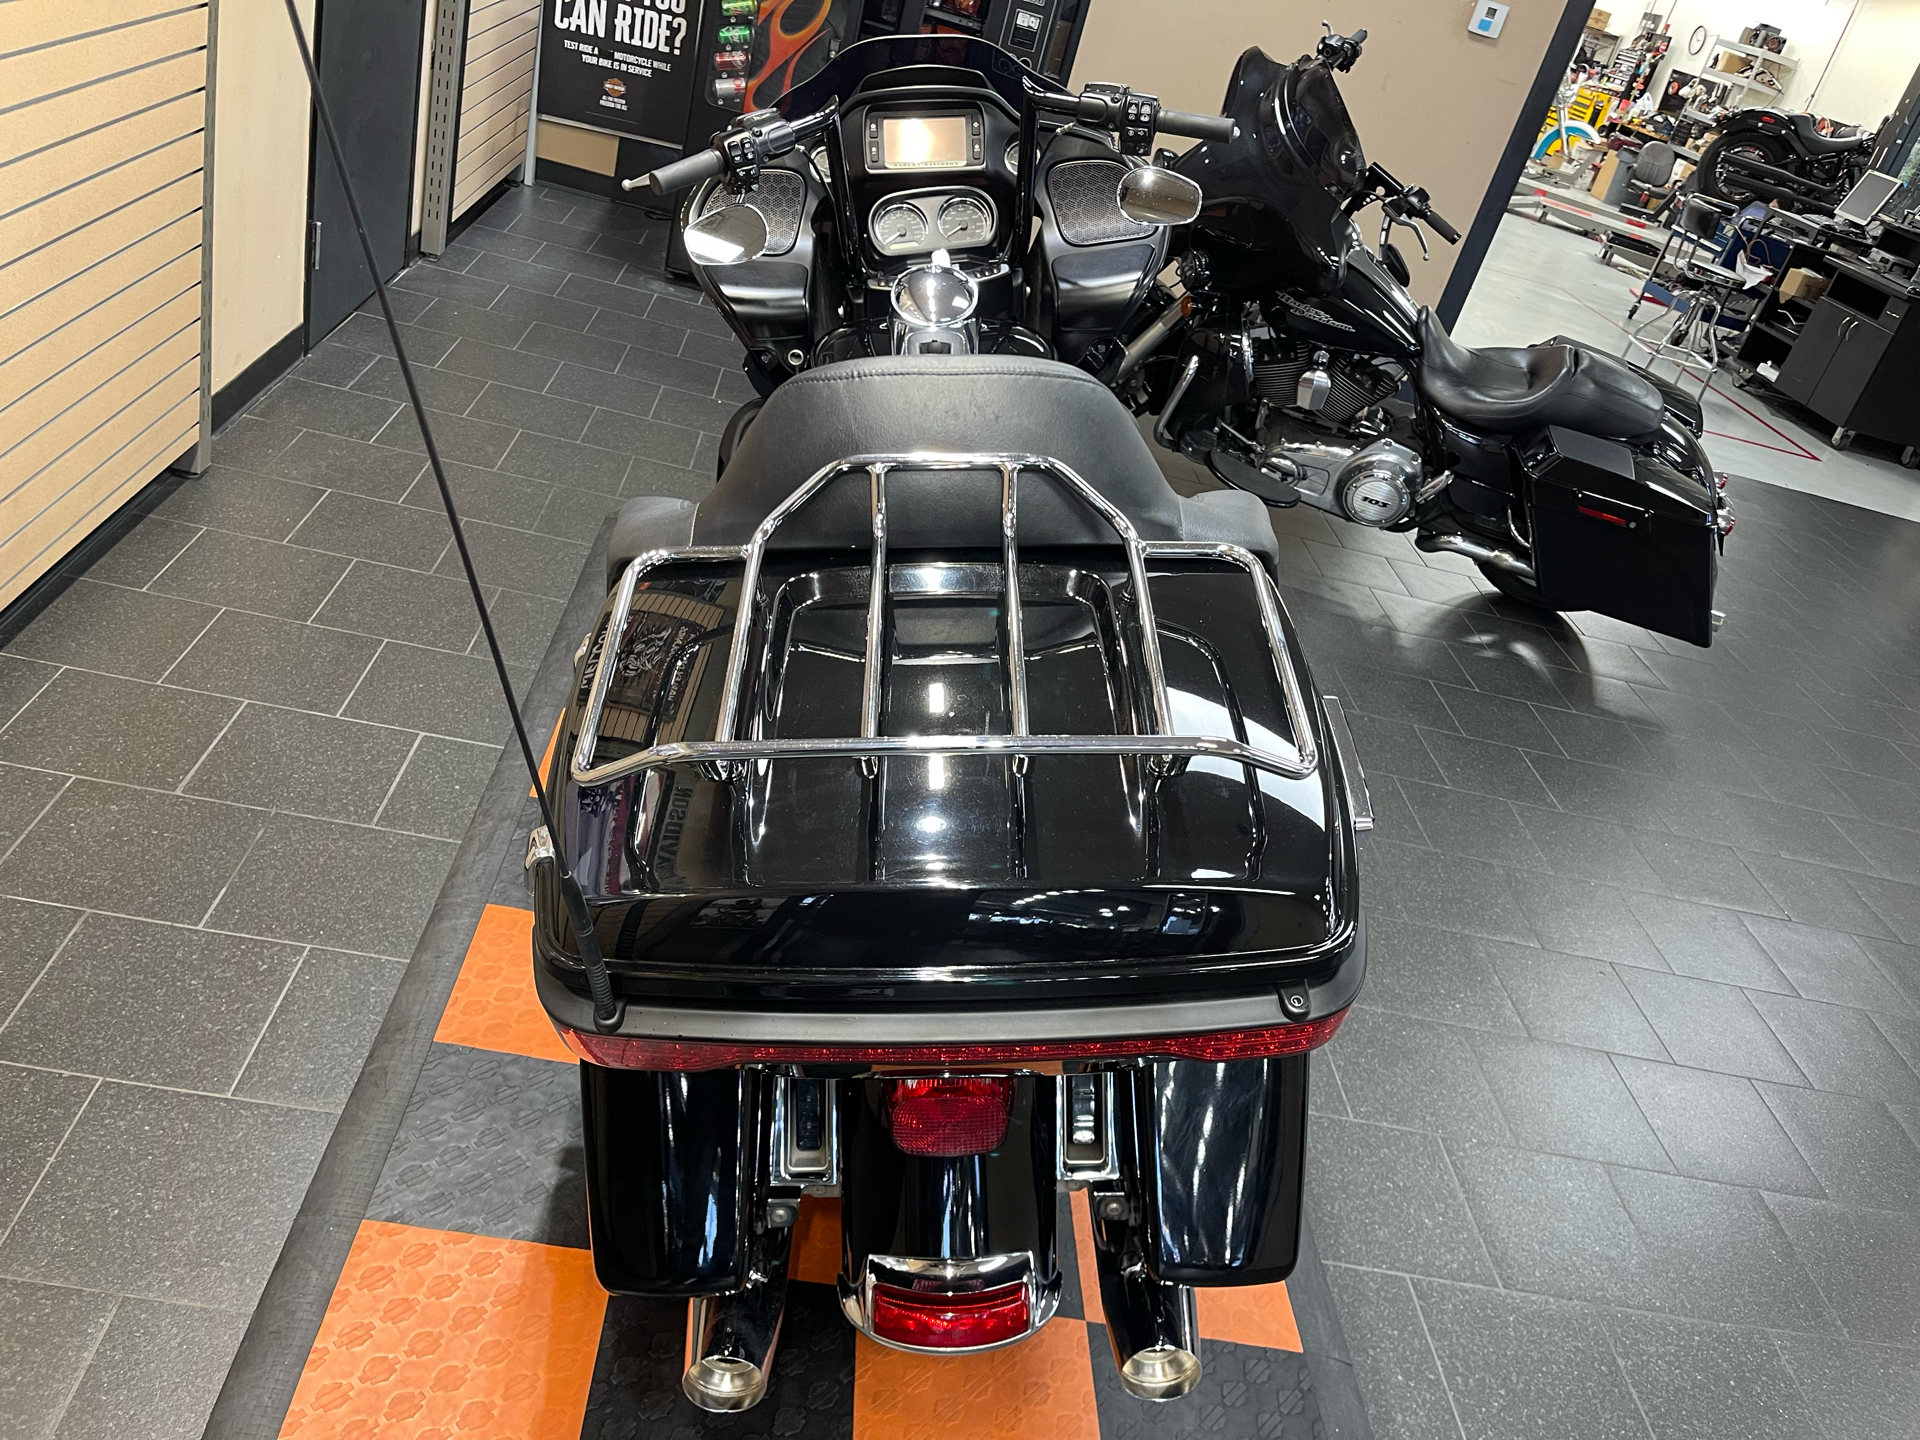 2016 Harley-Davidson Road Glide® Ultra in The Woodlands, Texas - Photo 5